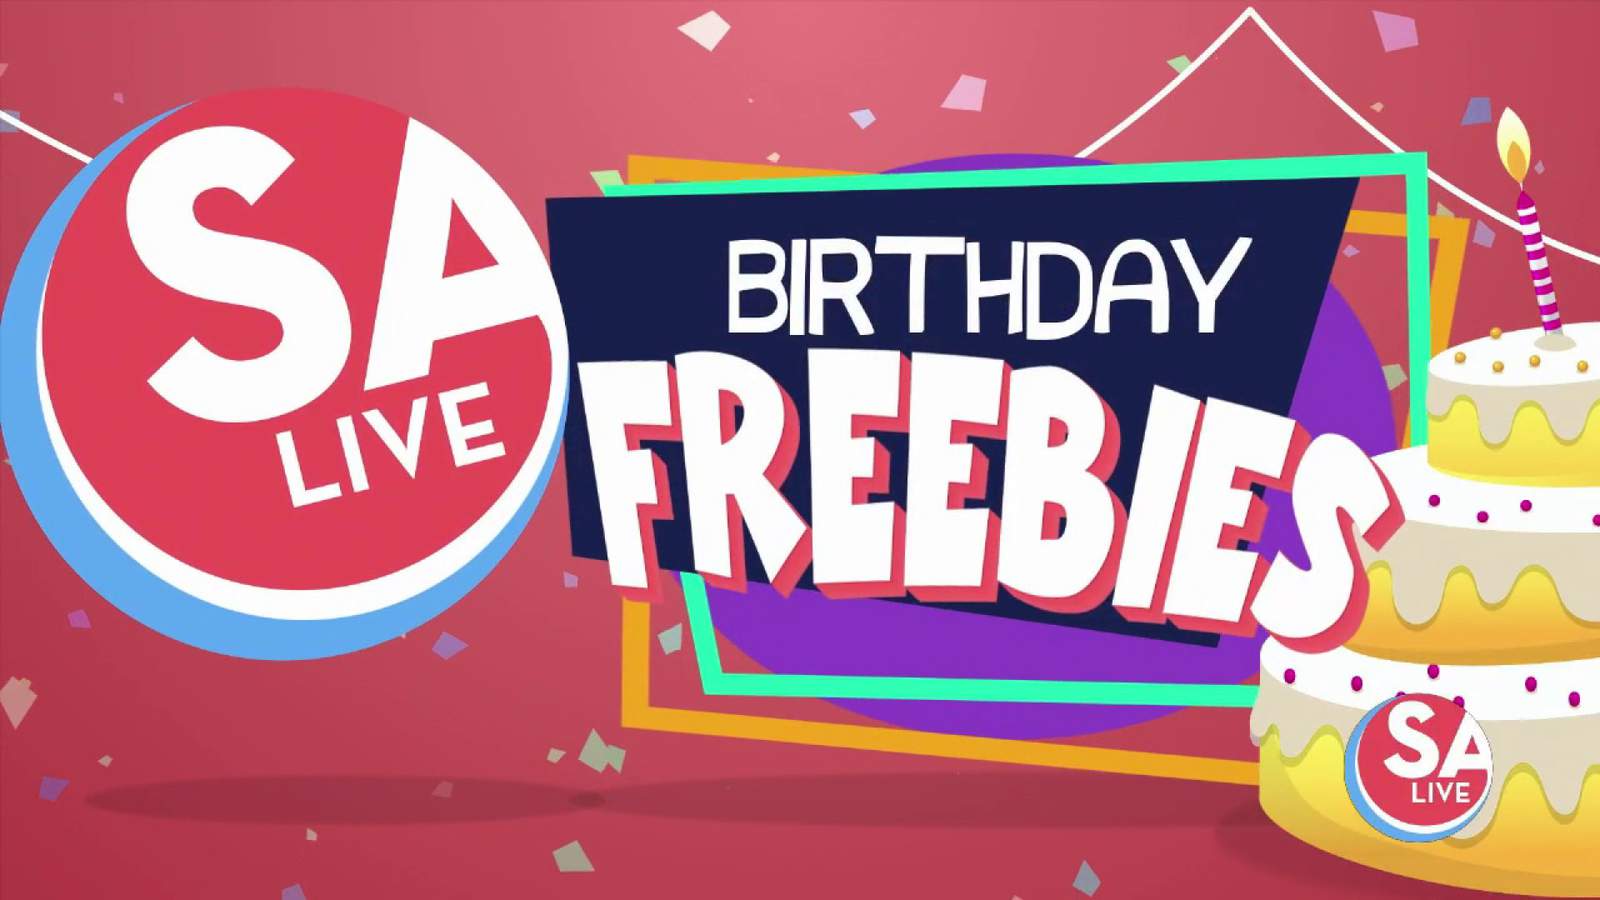 5 birthday freebies for those born in April